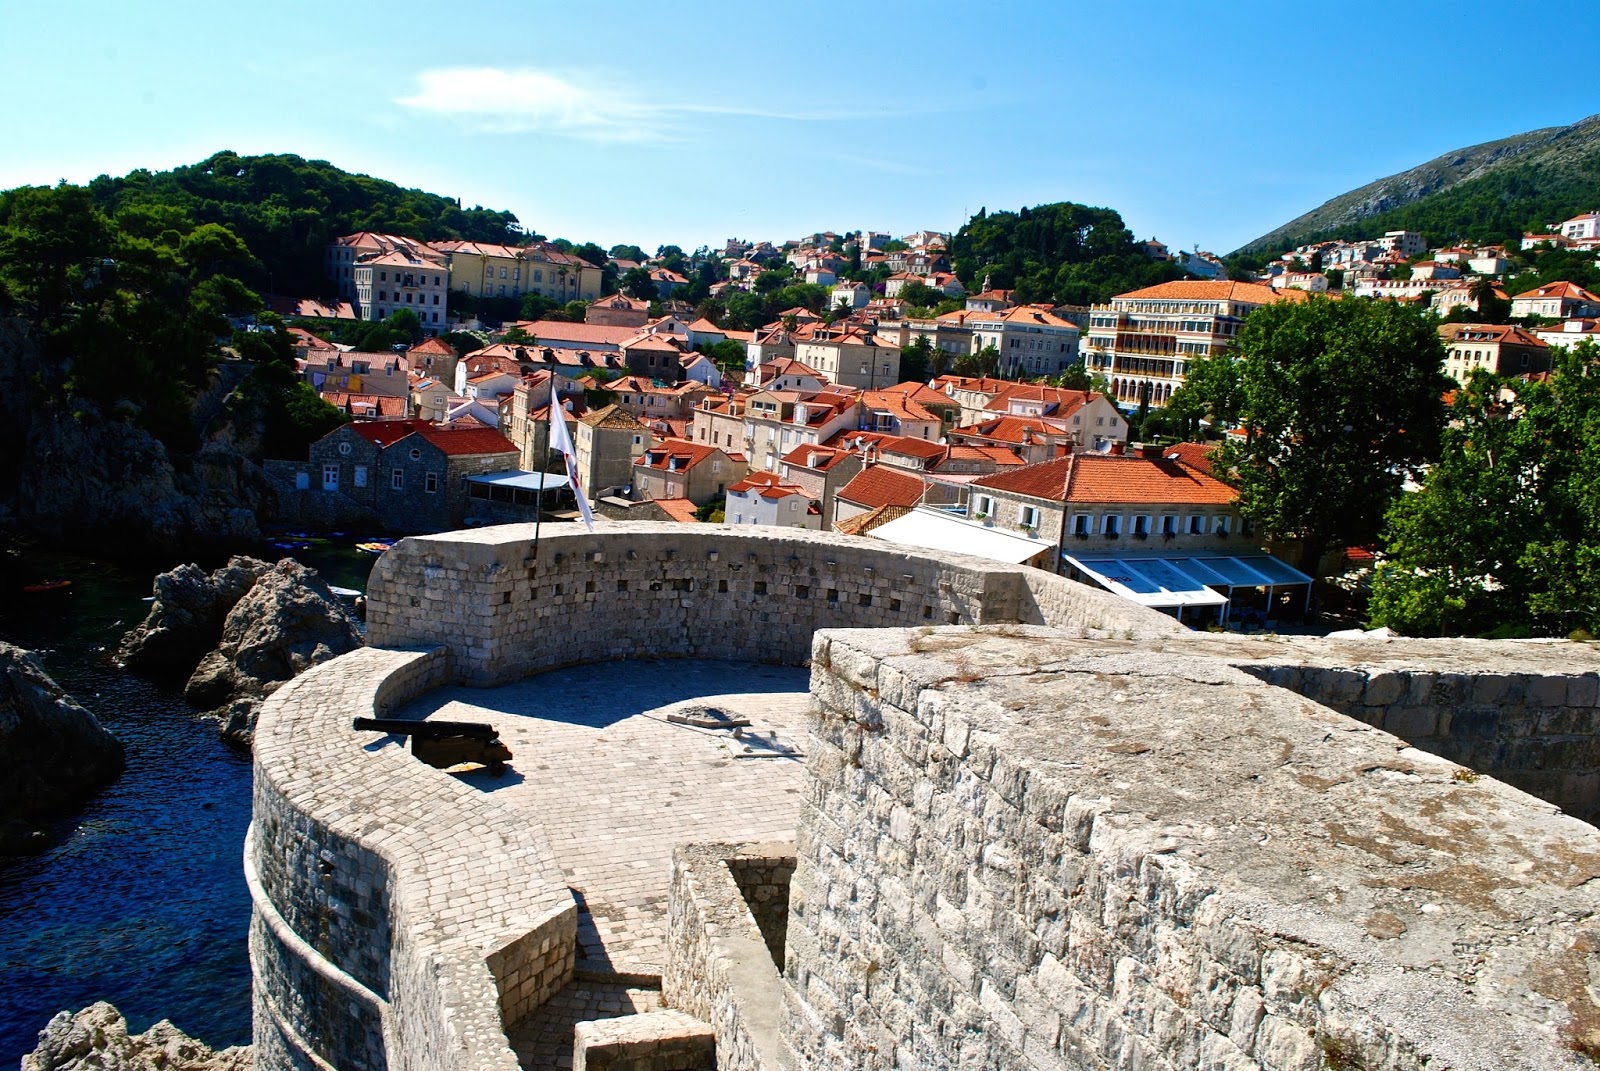 View from the Old Town Walls of Dubrovnik - Fort Bakur